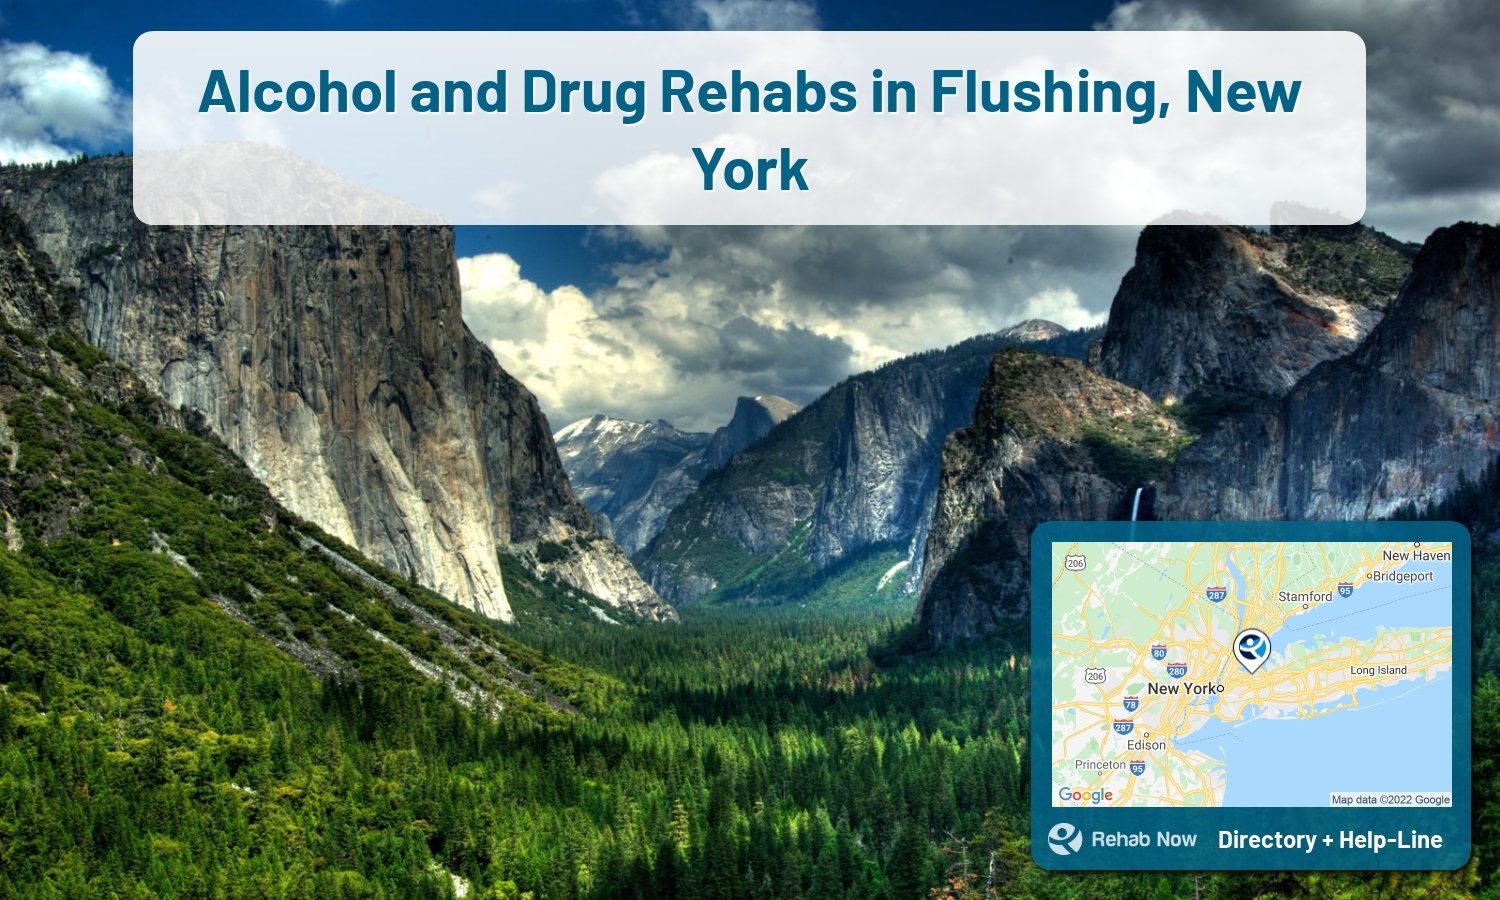 Flushing, NY Treatment Centers. Find drug rehab in Flushing, New York, or detox and treatment programs. Get the right help now!